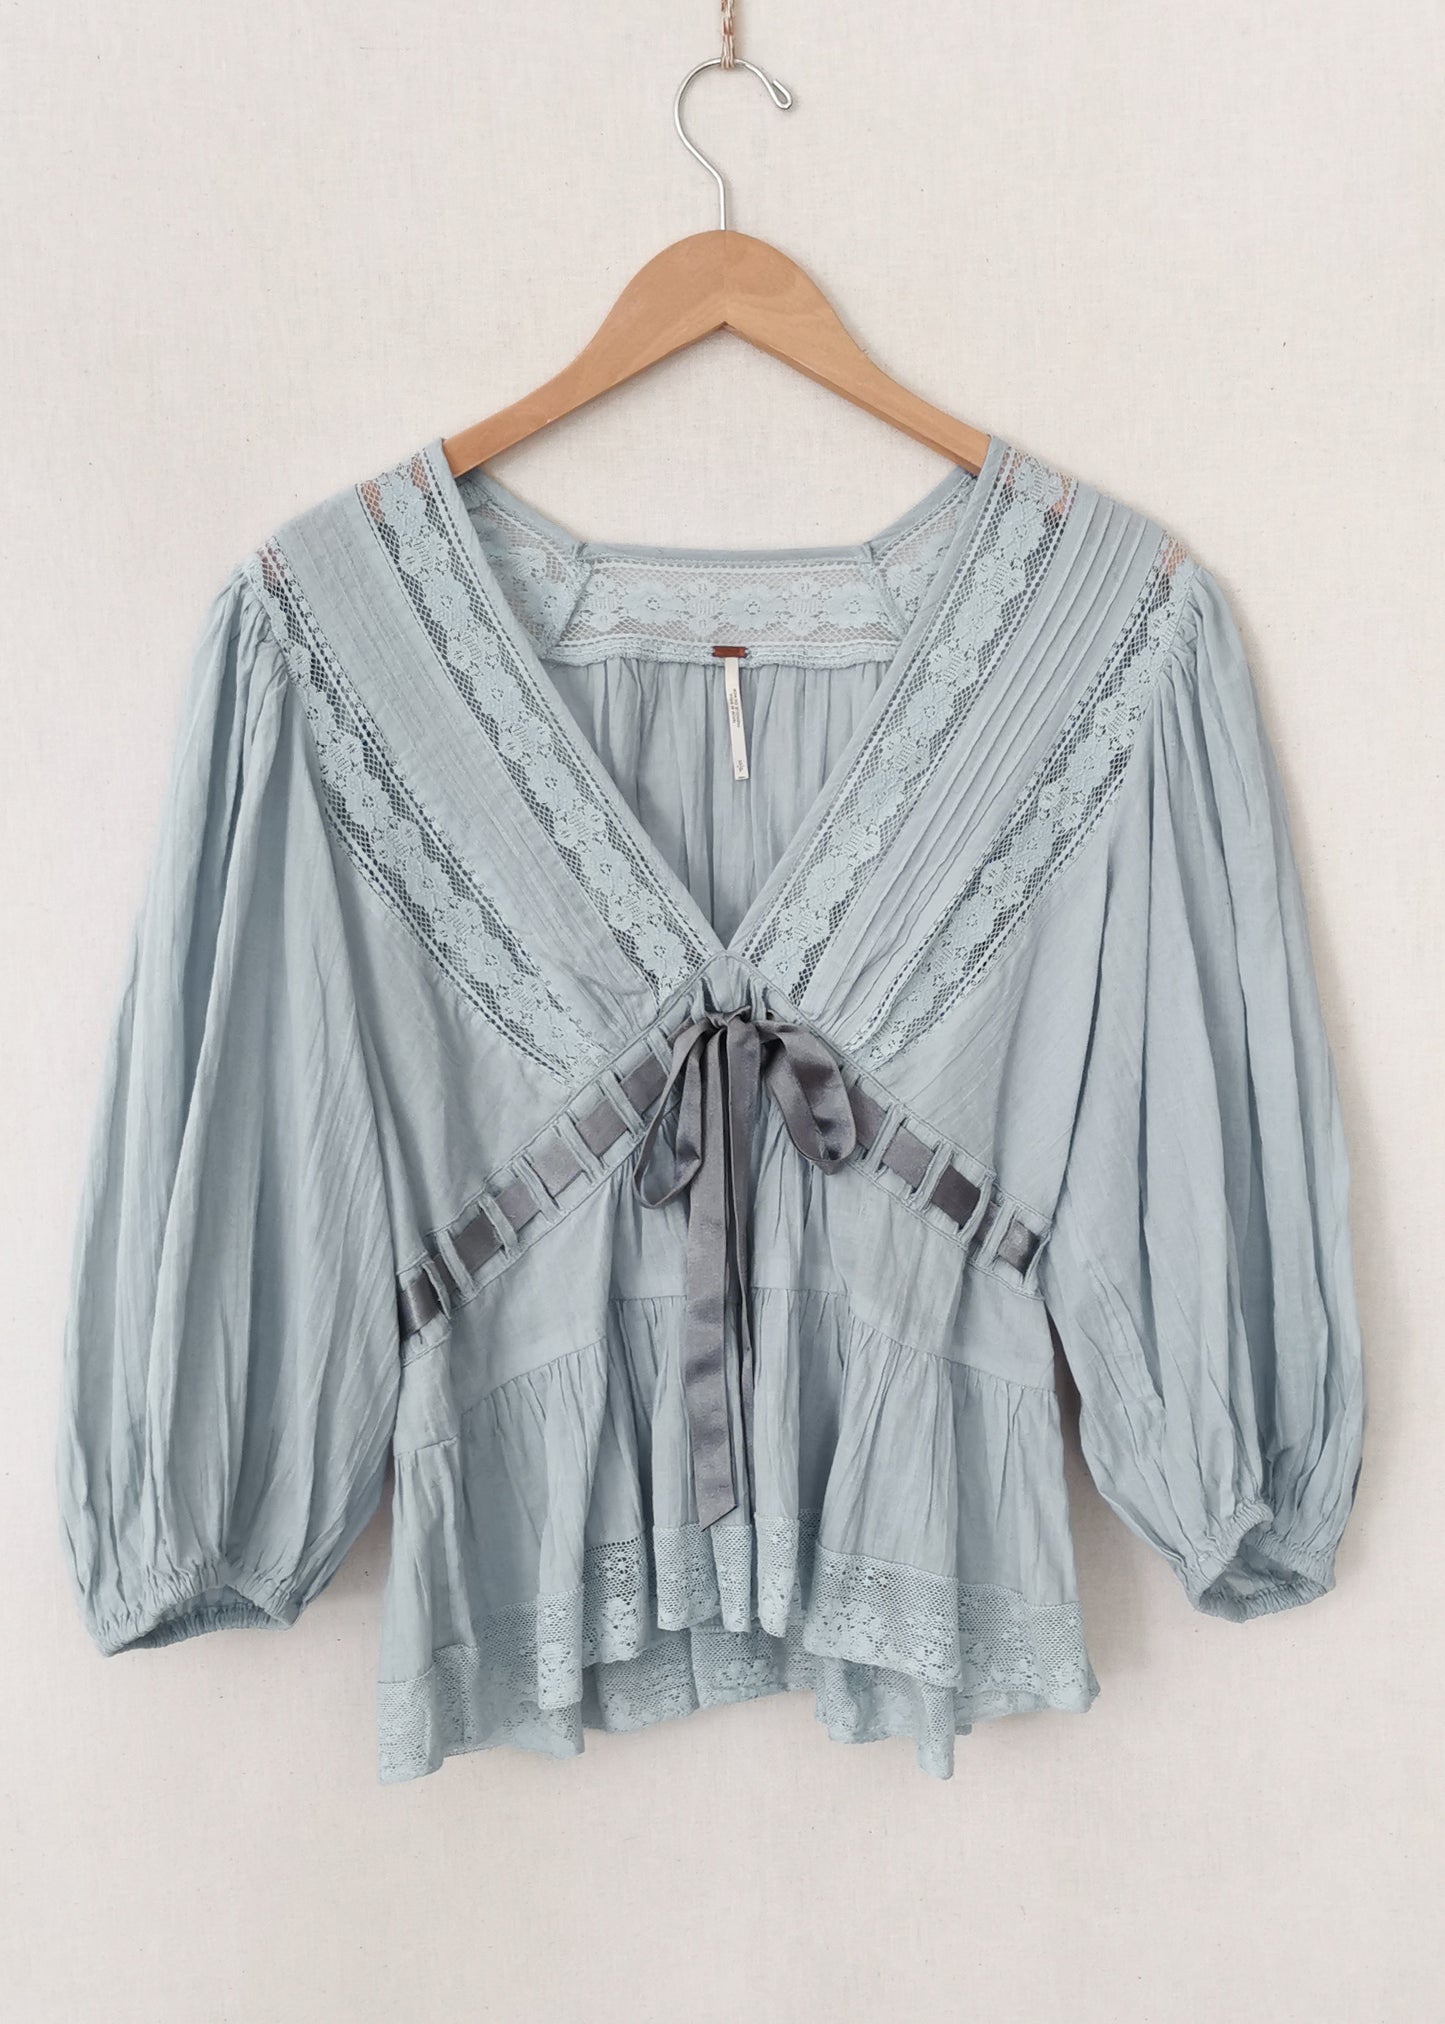 Free People Cotton Top (S)